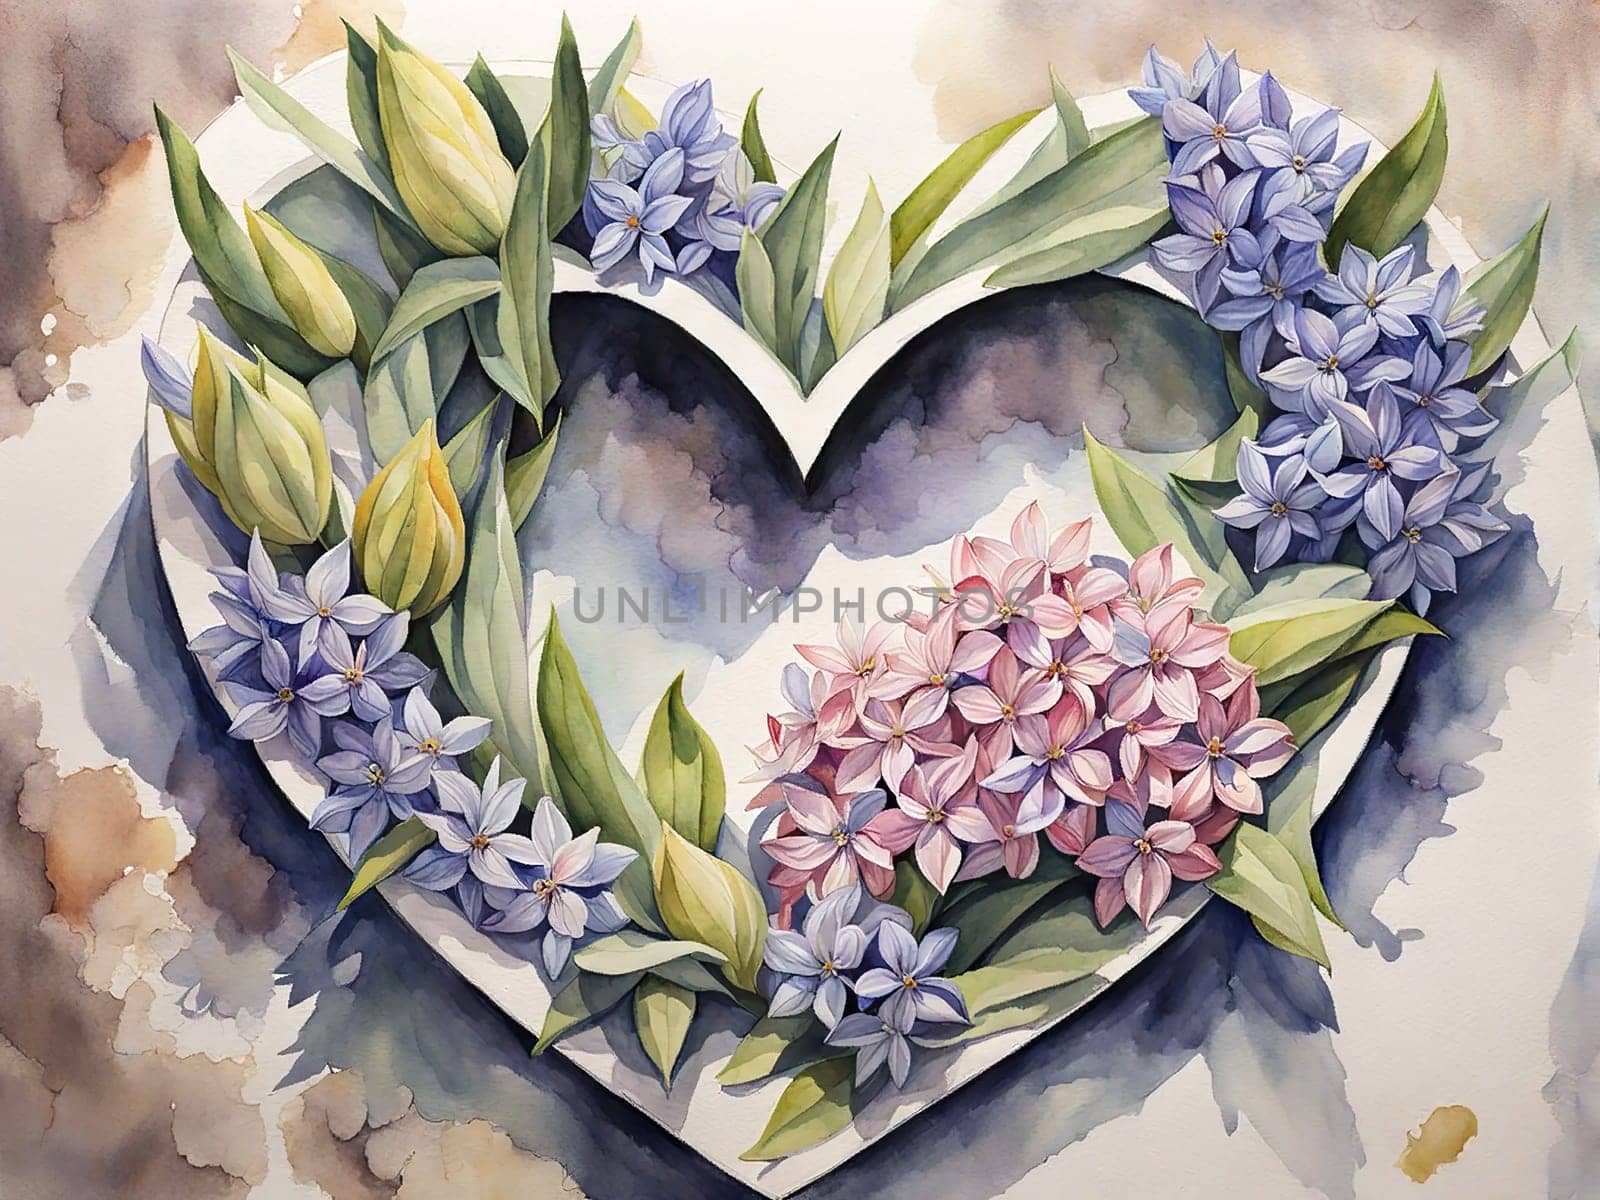 Watercolor Illustration March 8th heart made hyacinths. International Women's Day, or Mother's Day. Abstract pink and violet Watercolor Greeting Card.